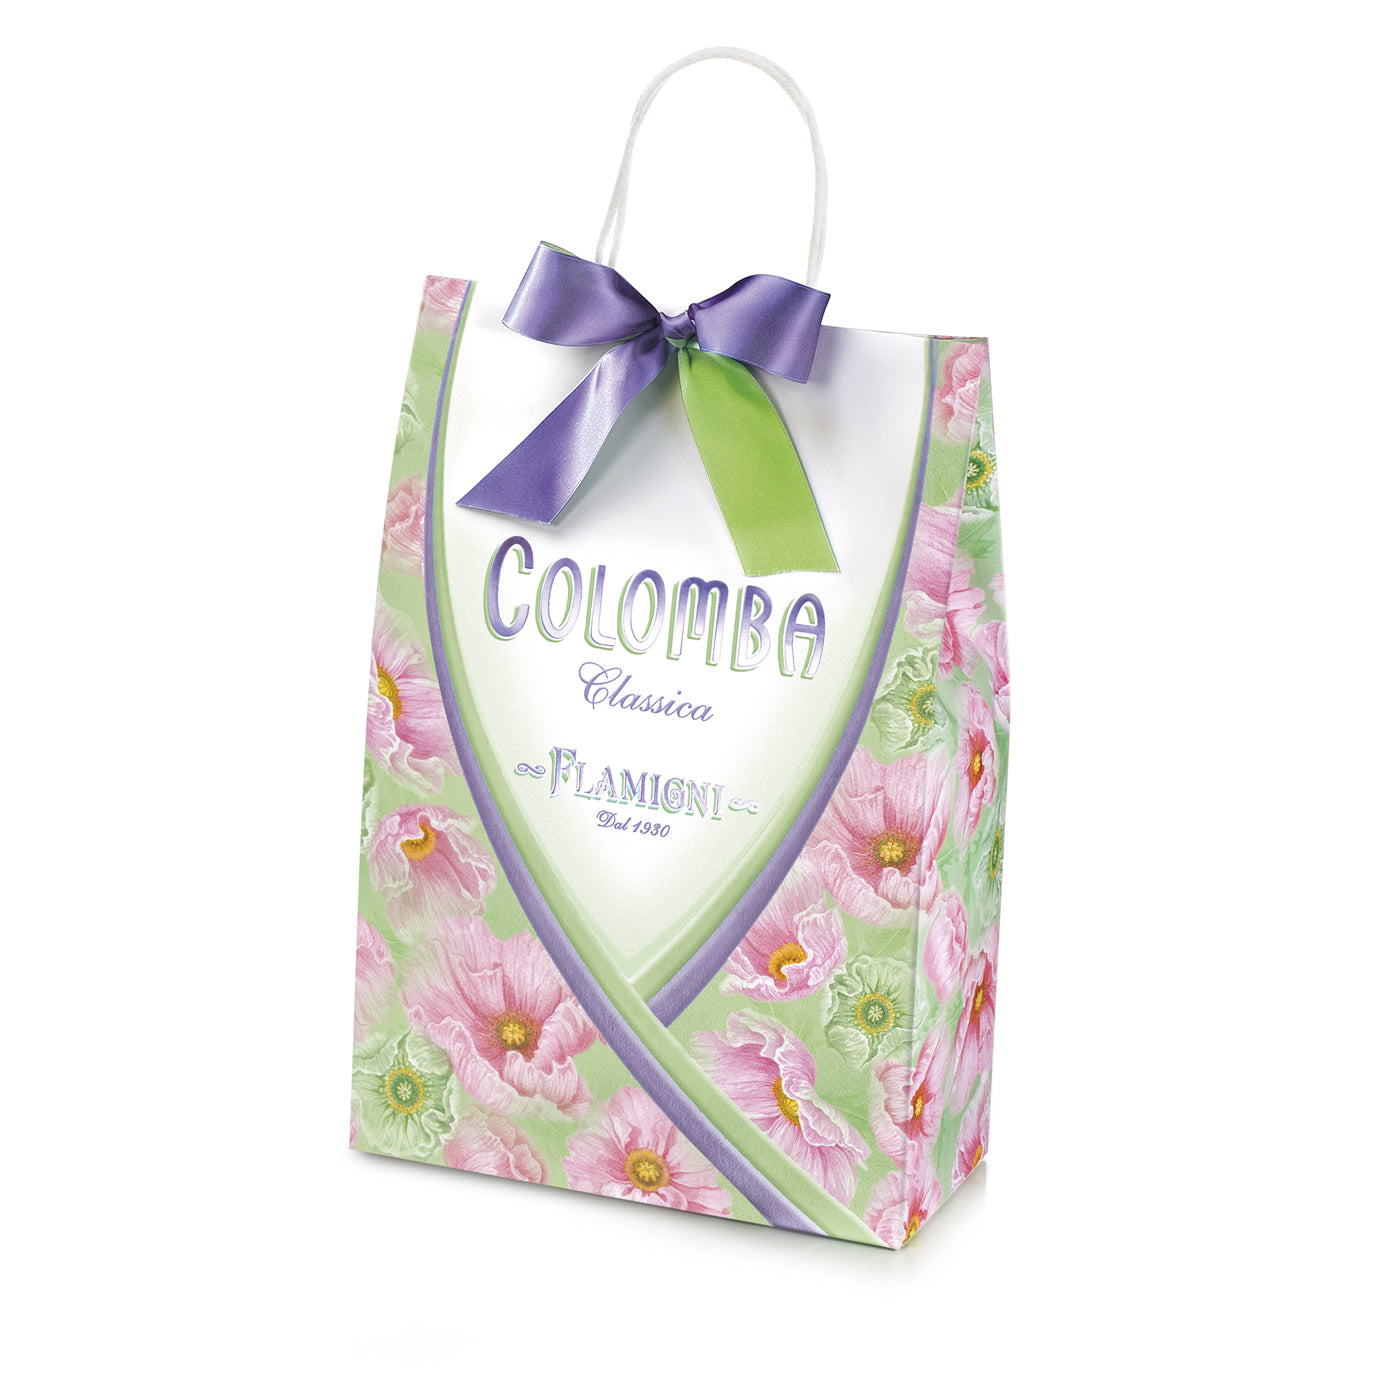 Classic Colomba in gift bag